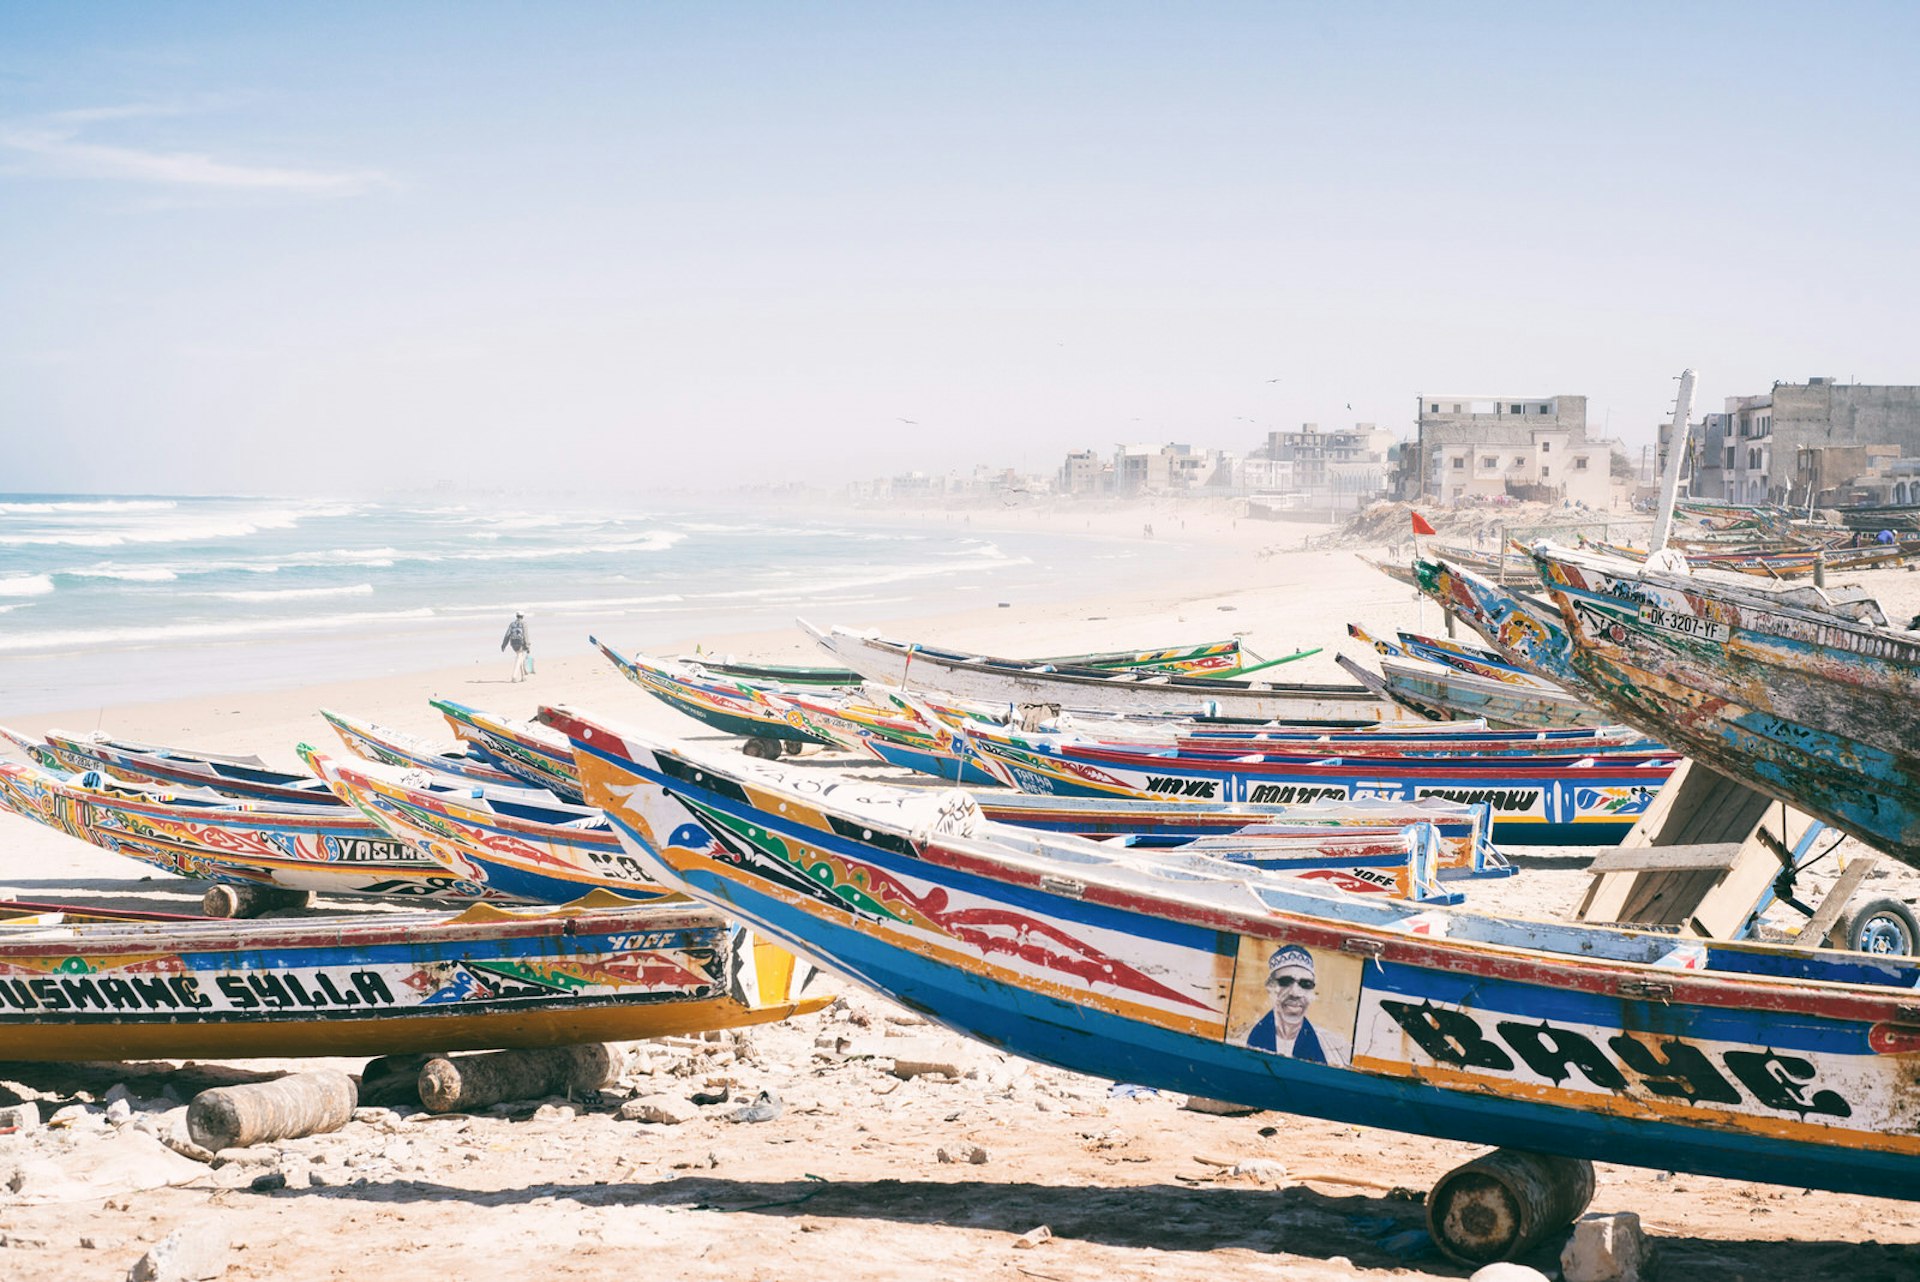 Long canoes painted in vibrant blues, yellows and reds sit side-by-side on the beach; waves roll in, while cement buildings back the scene.